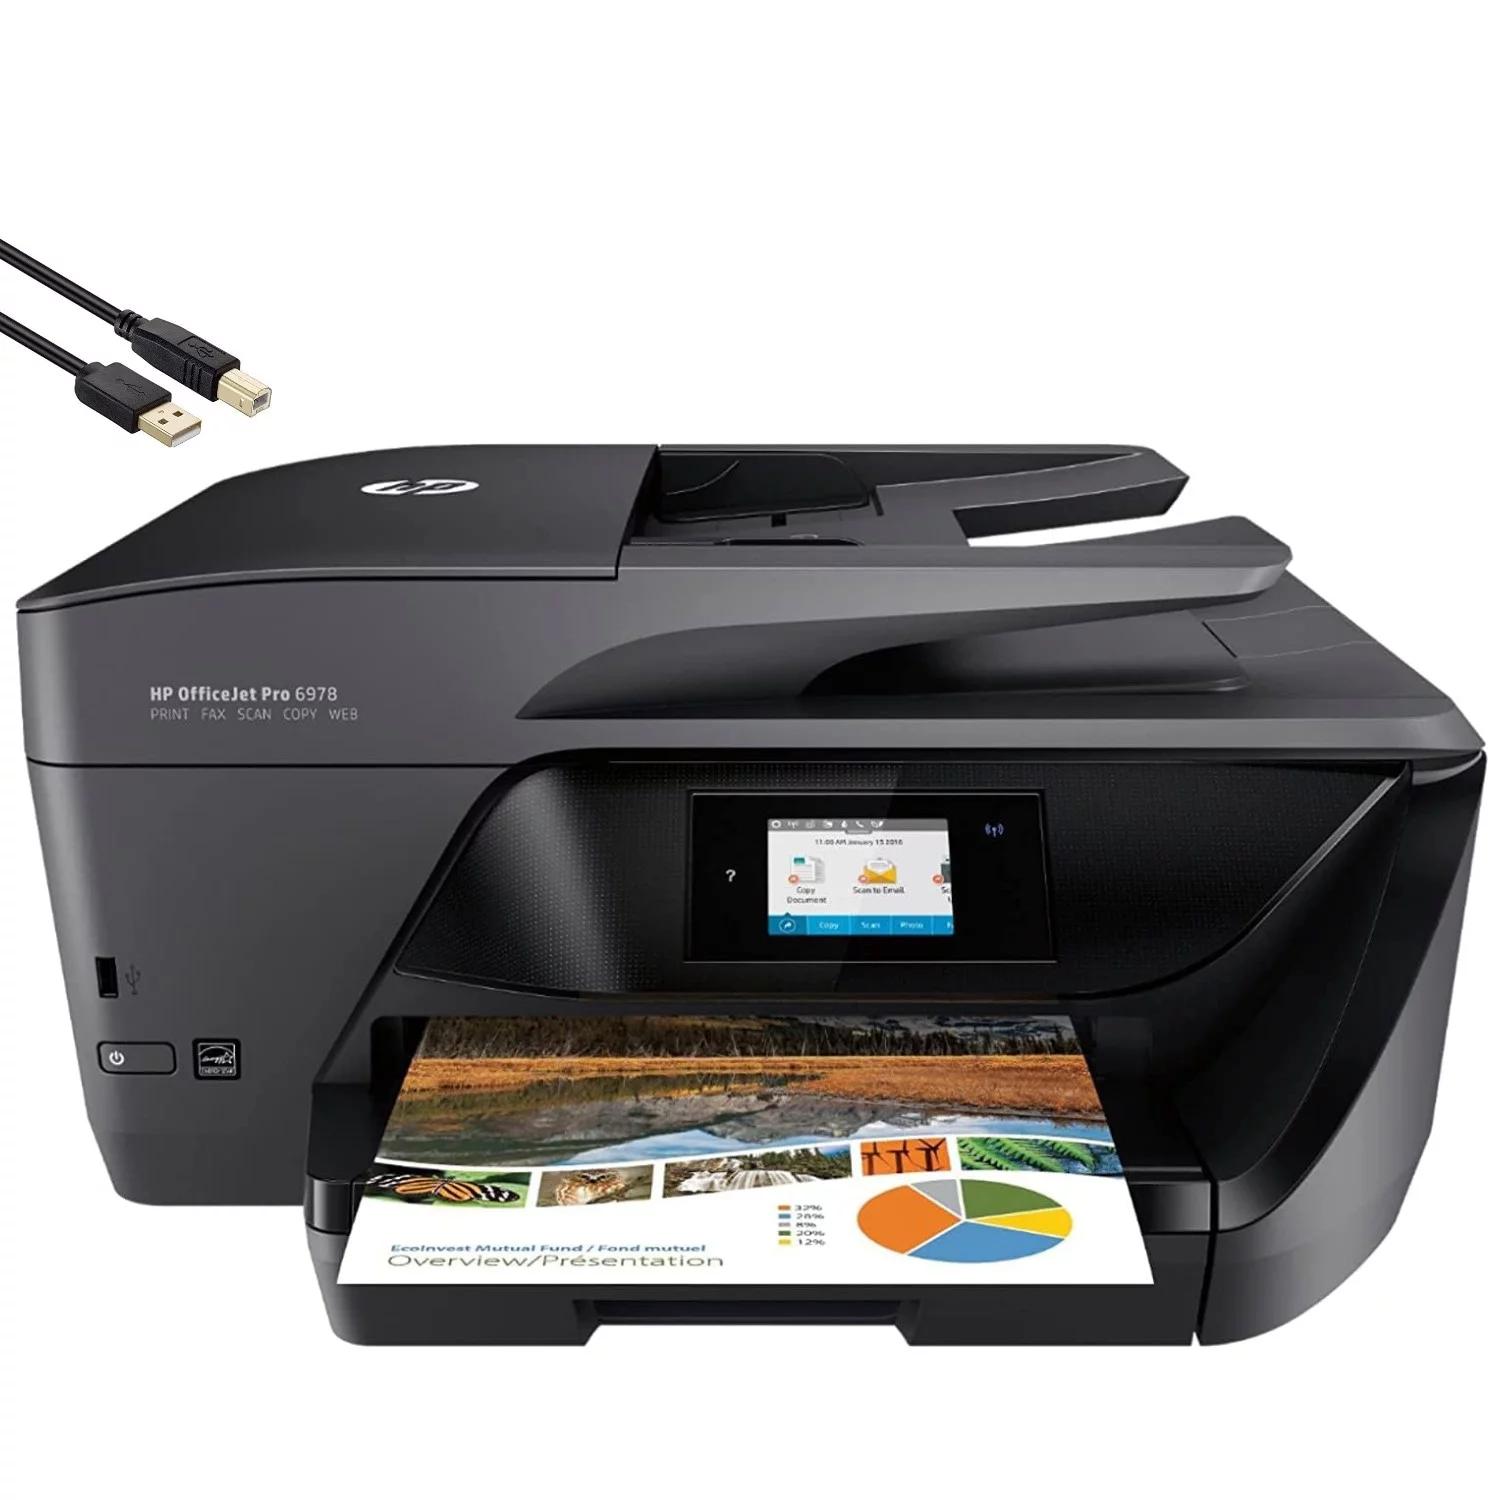 will a hewlett packard hp 6978 printer do duplex printing - Does HP 6978 print double-sided